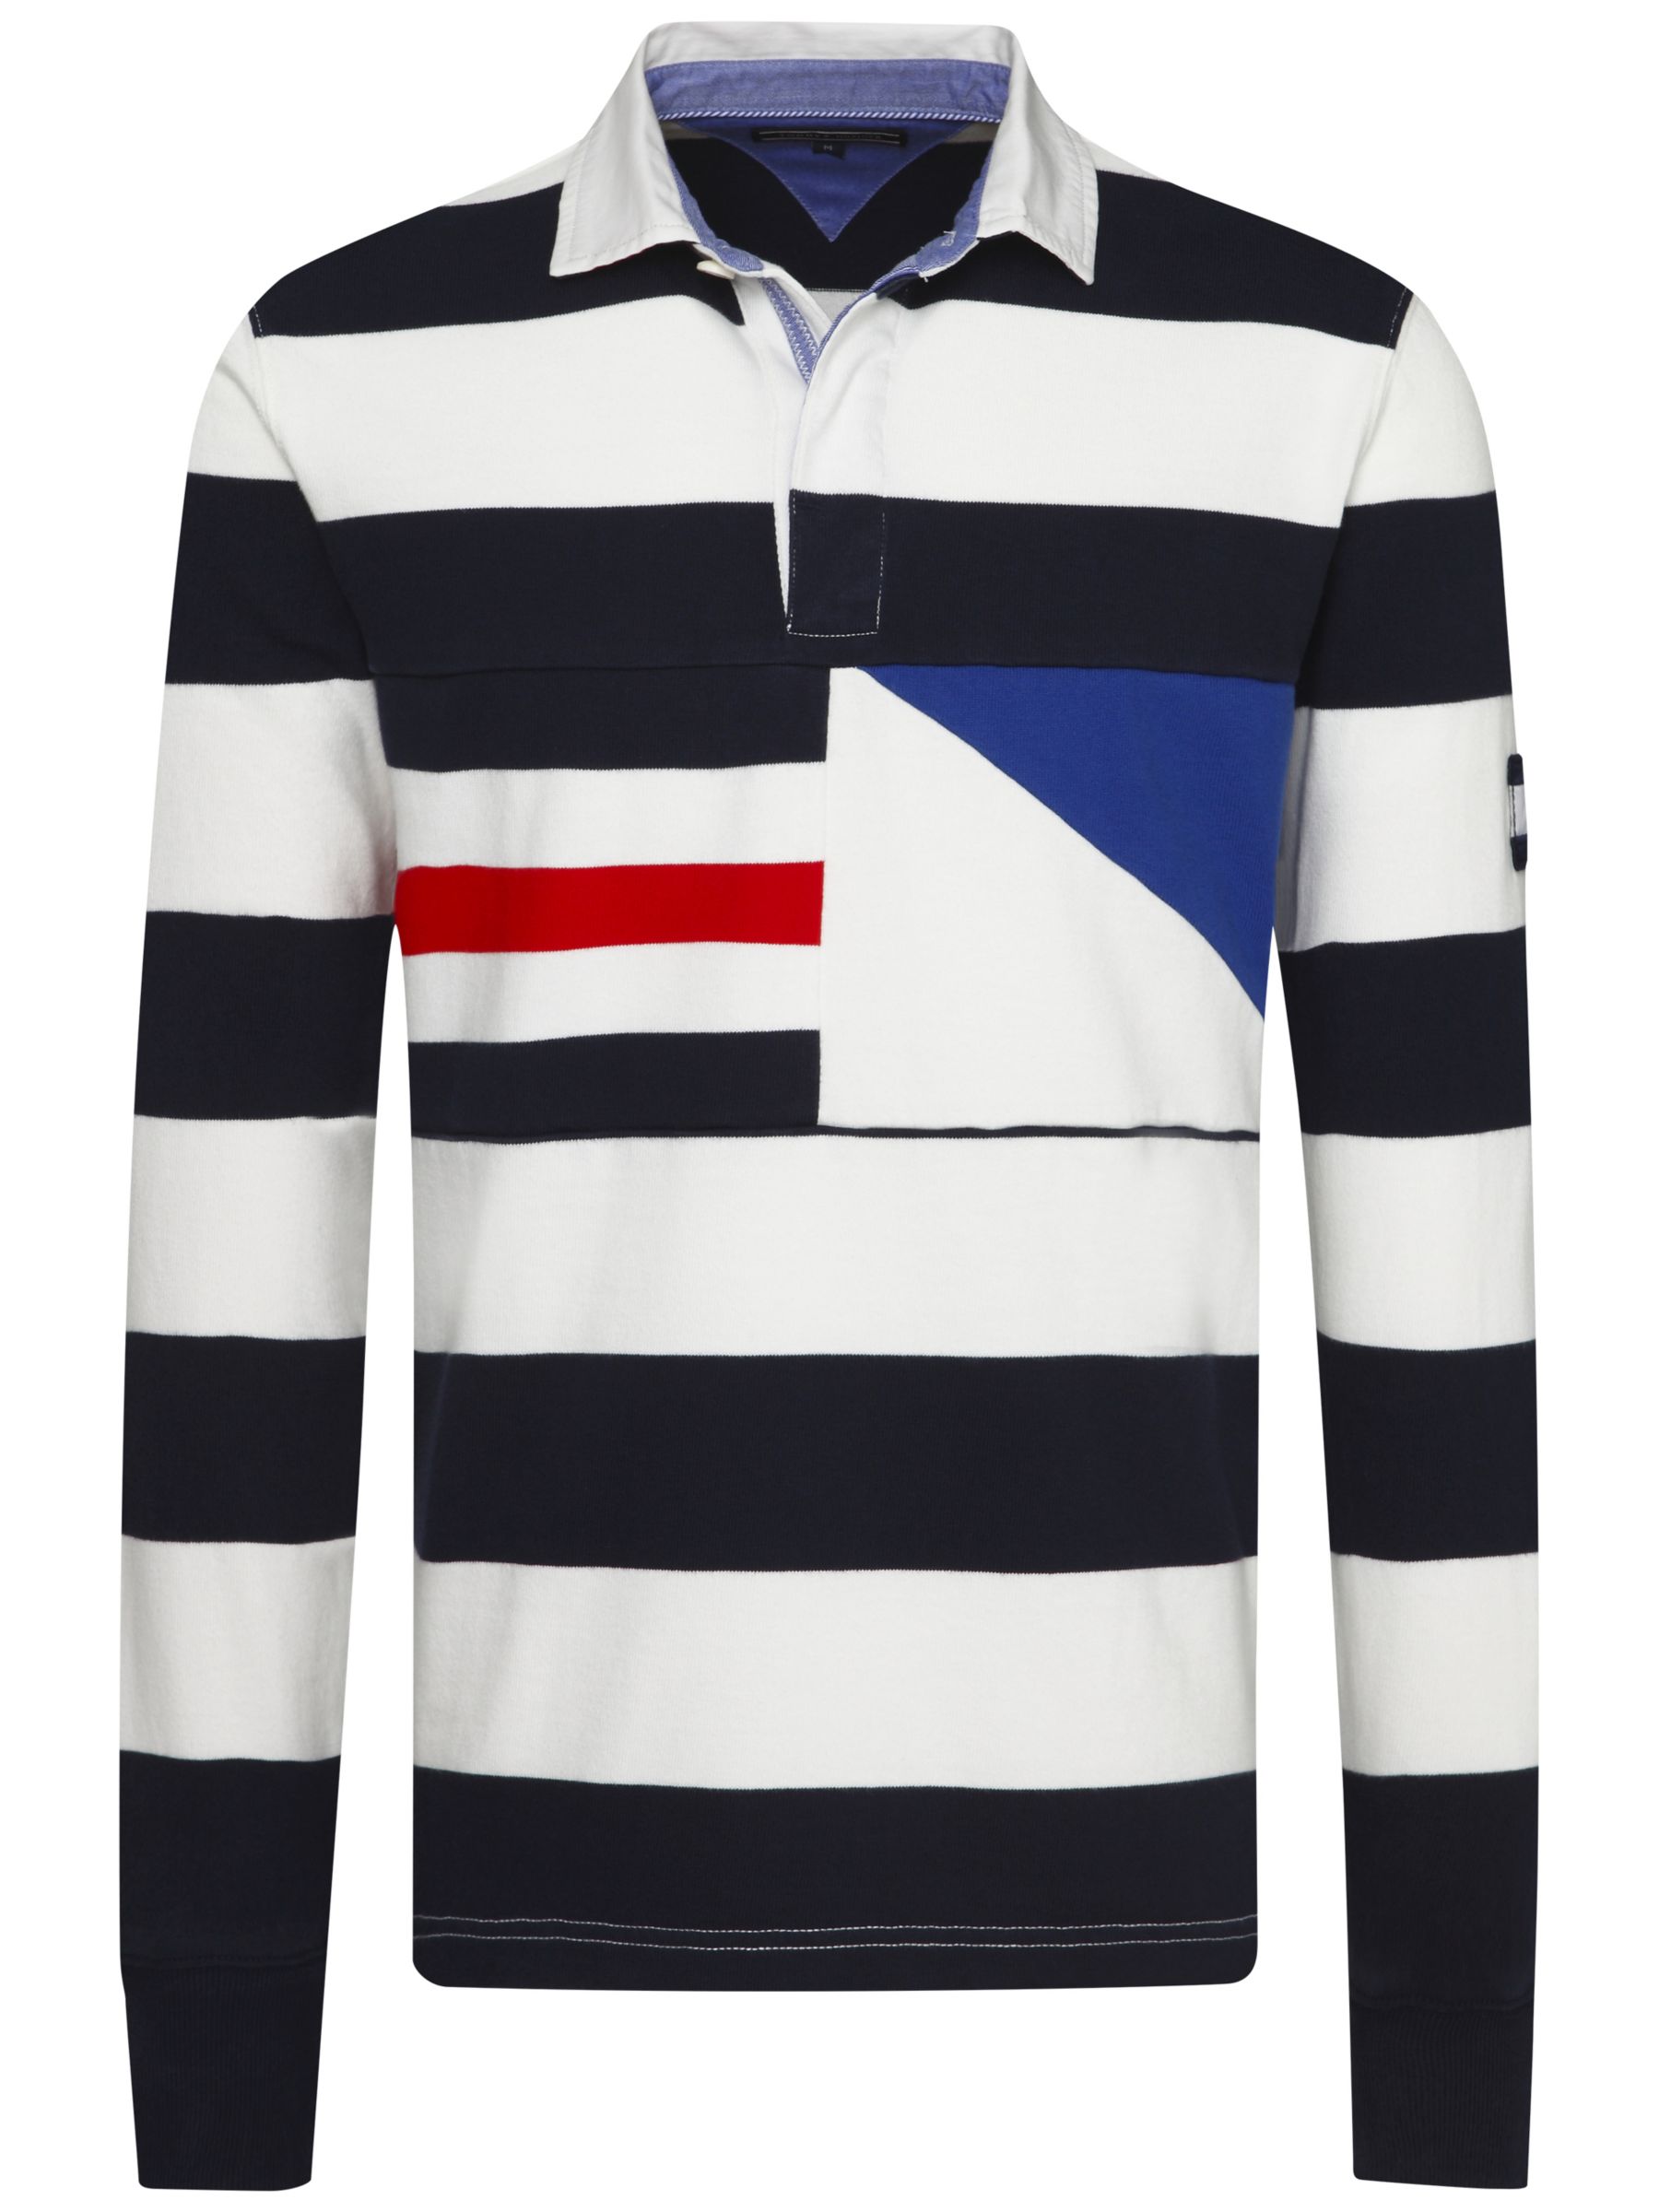 tommy hilfiger striped rugby shirt